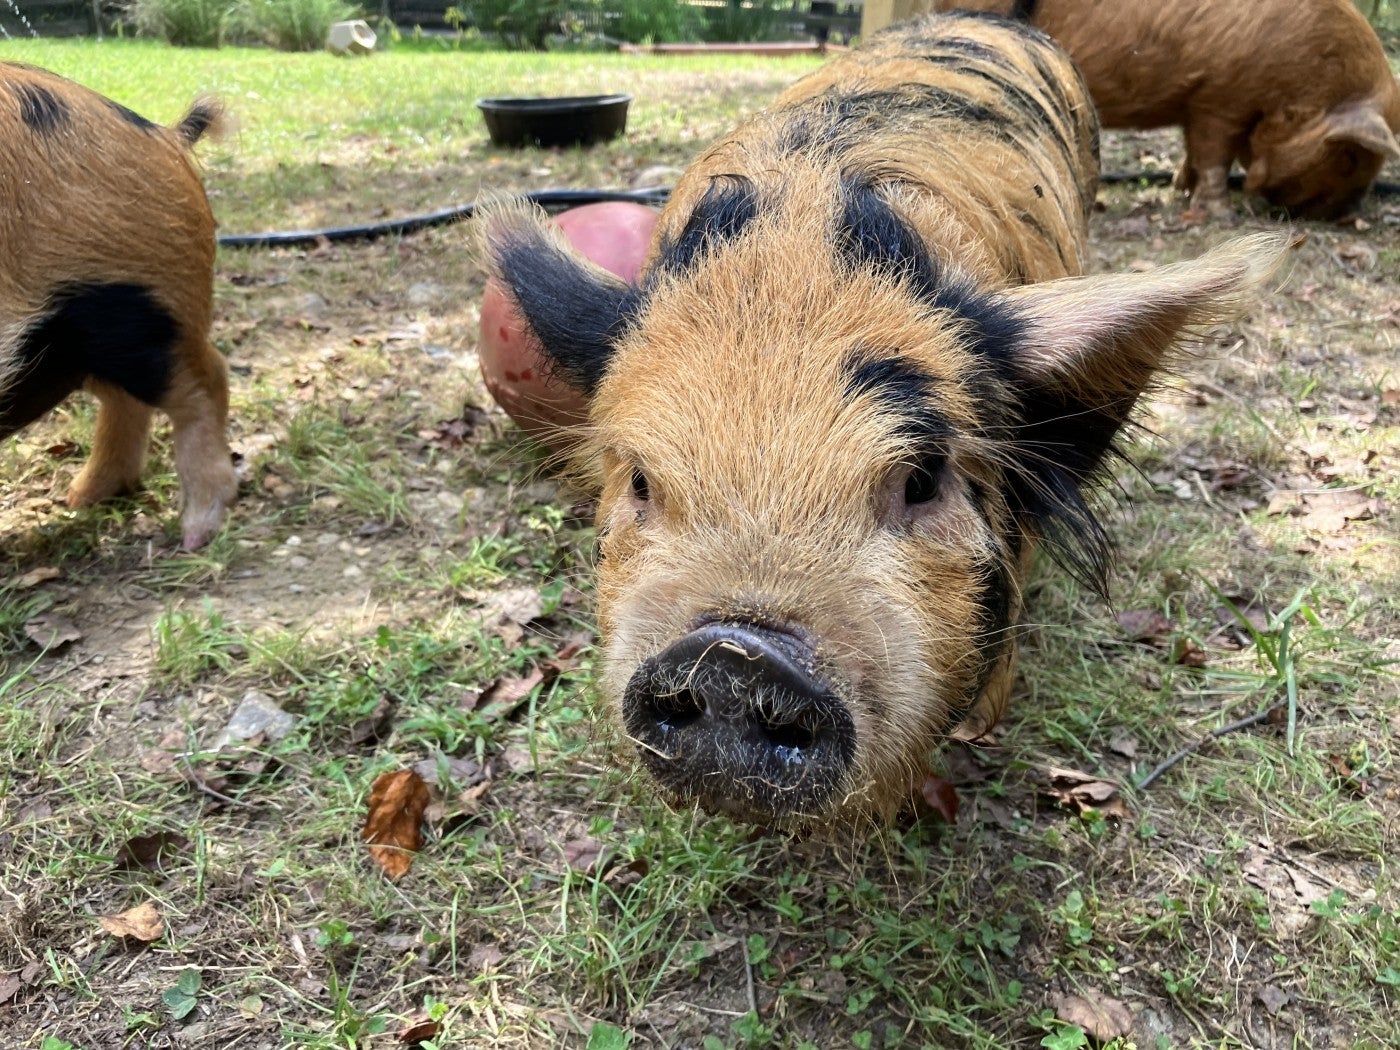 Photo of Winston, a young kunekune pig. Winston is a light brown color, with black markings on his ears, face, and back.